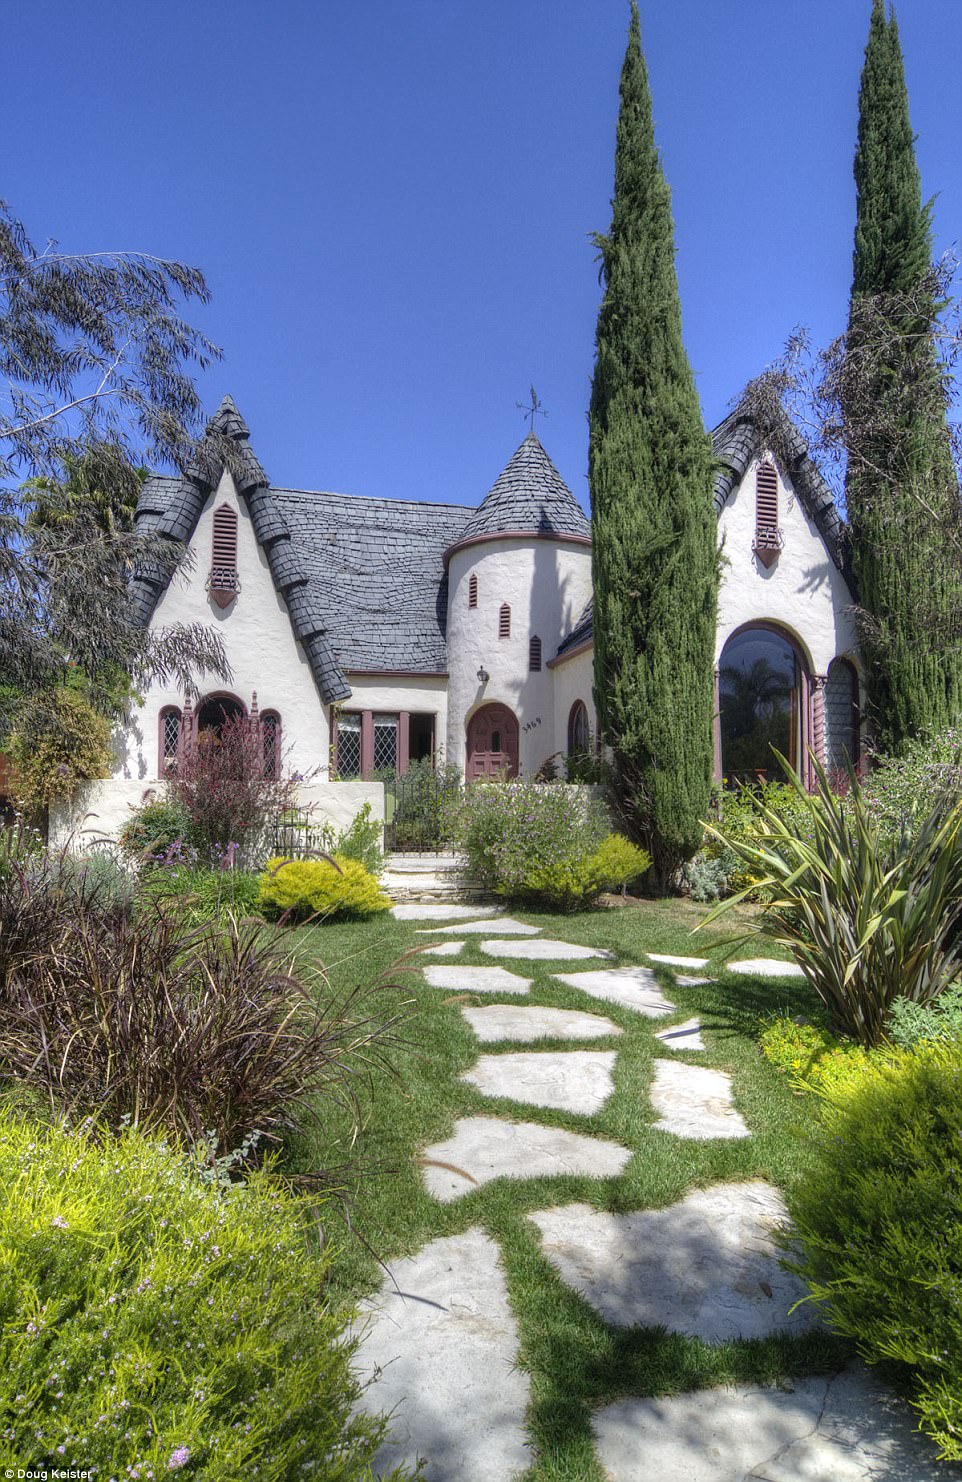 Just another storybook style cottage in Long Beach